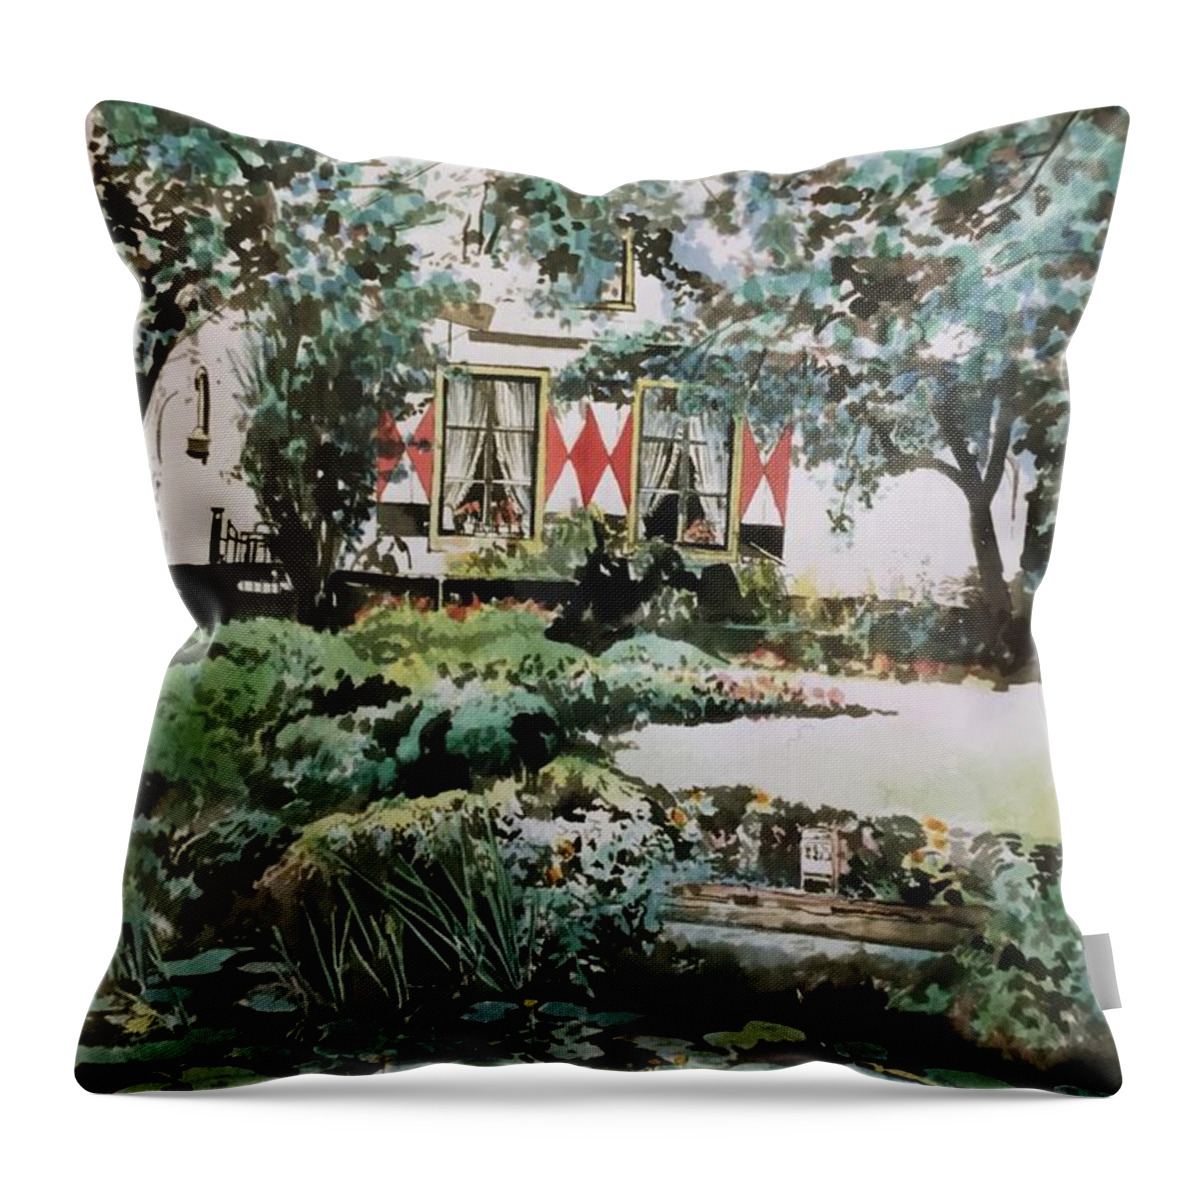 #lillypond Lilly Pond #watercolor #watercolorpainting #holland #ruralholland #glenneff #thesoundpoetsmusic #picturerockstudio Www.glenneff.com Throw Pillow featuring the painting Lilly Pond Rural Holland by Glen Neff